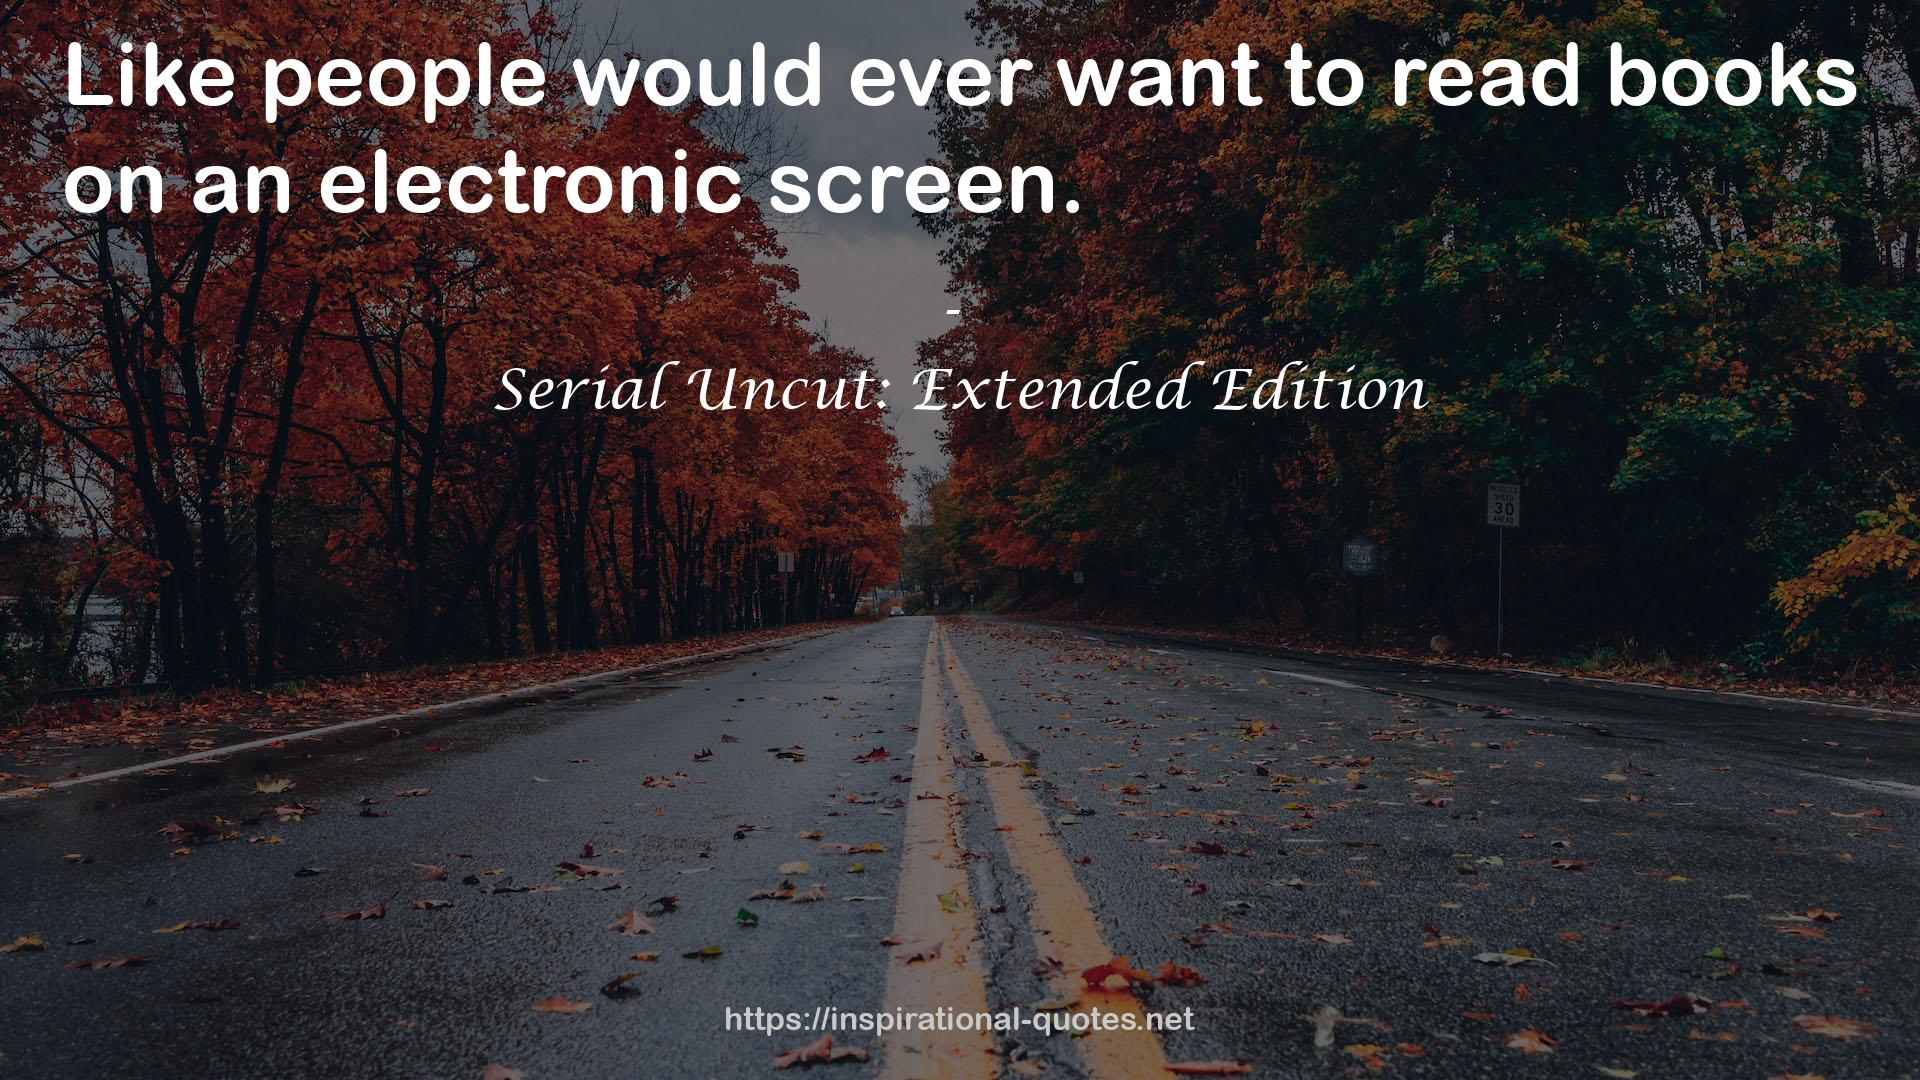 Serial Uncut: Extended Edition QUOTES